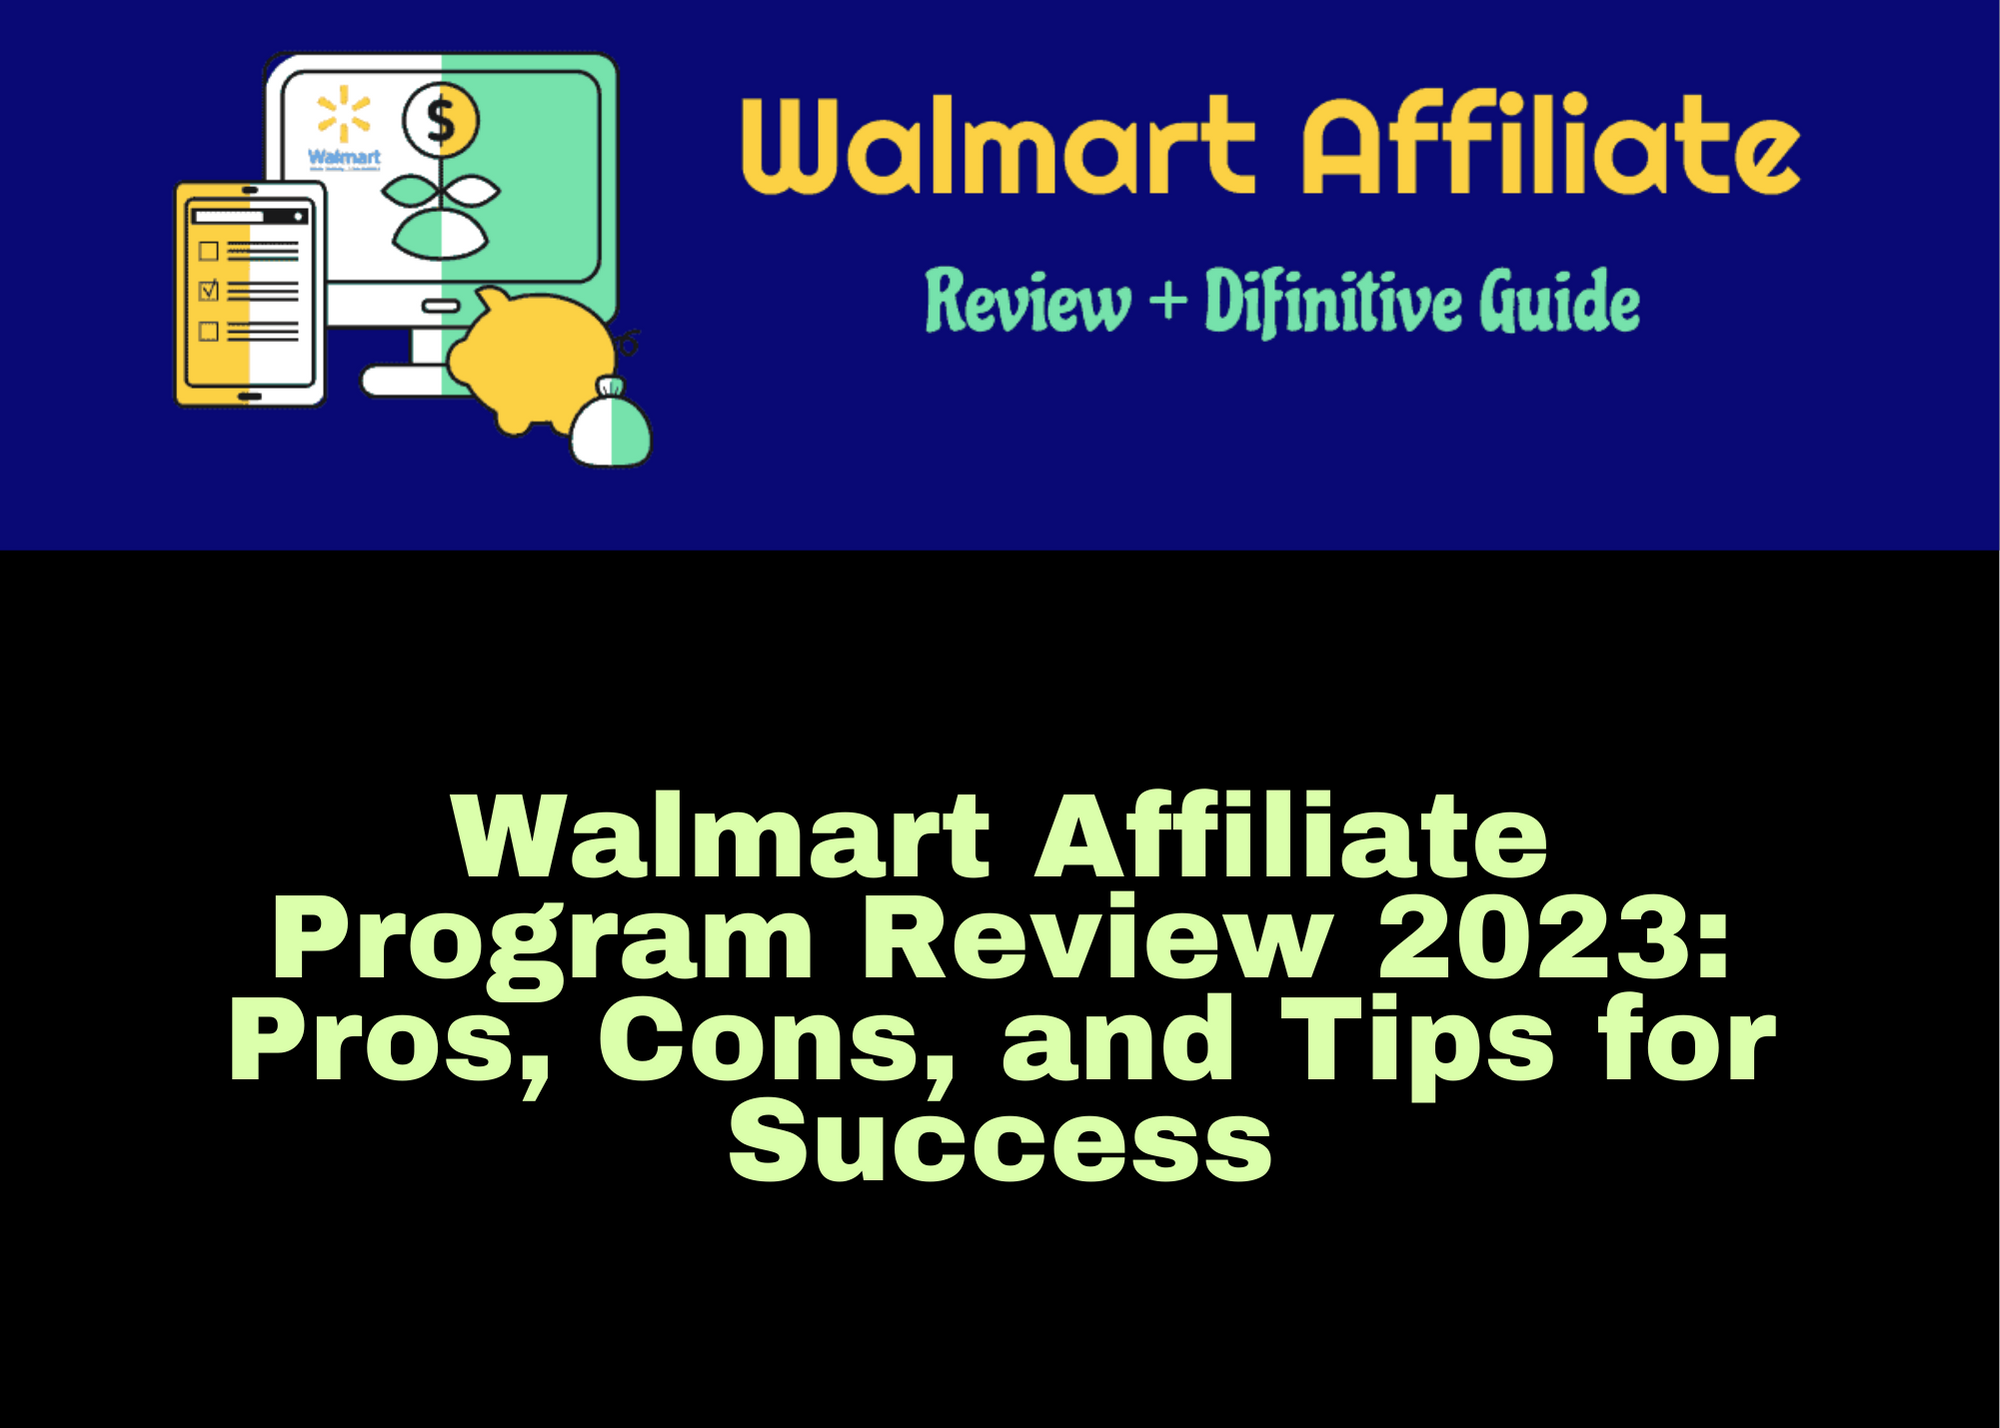 Walmart Affiliate Program Review 2023 Pros, Cons, and Tips for Success